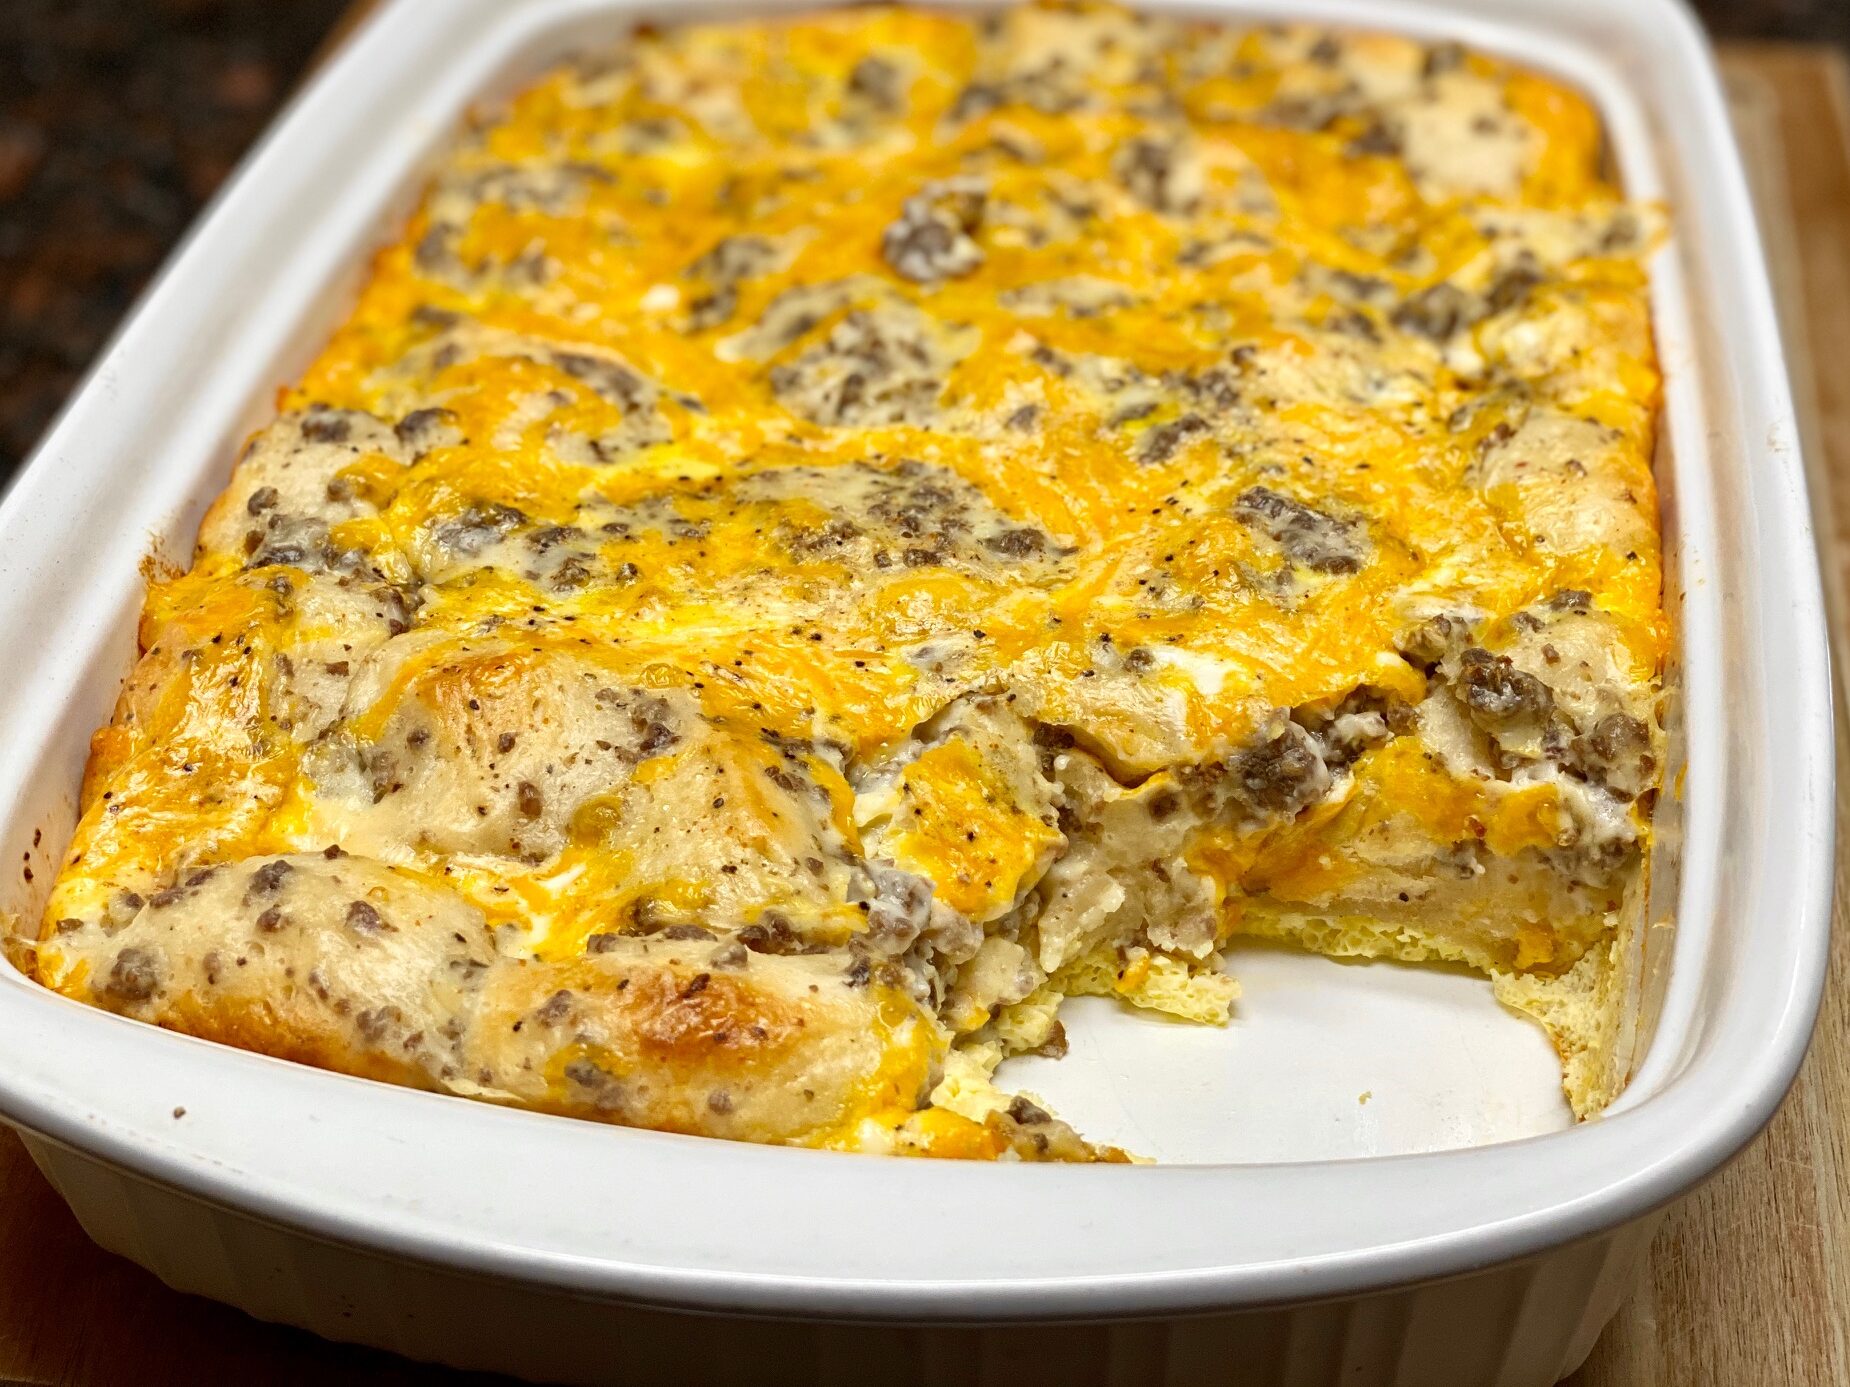 BISCUITS AND GRAVY CASSEROLE